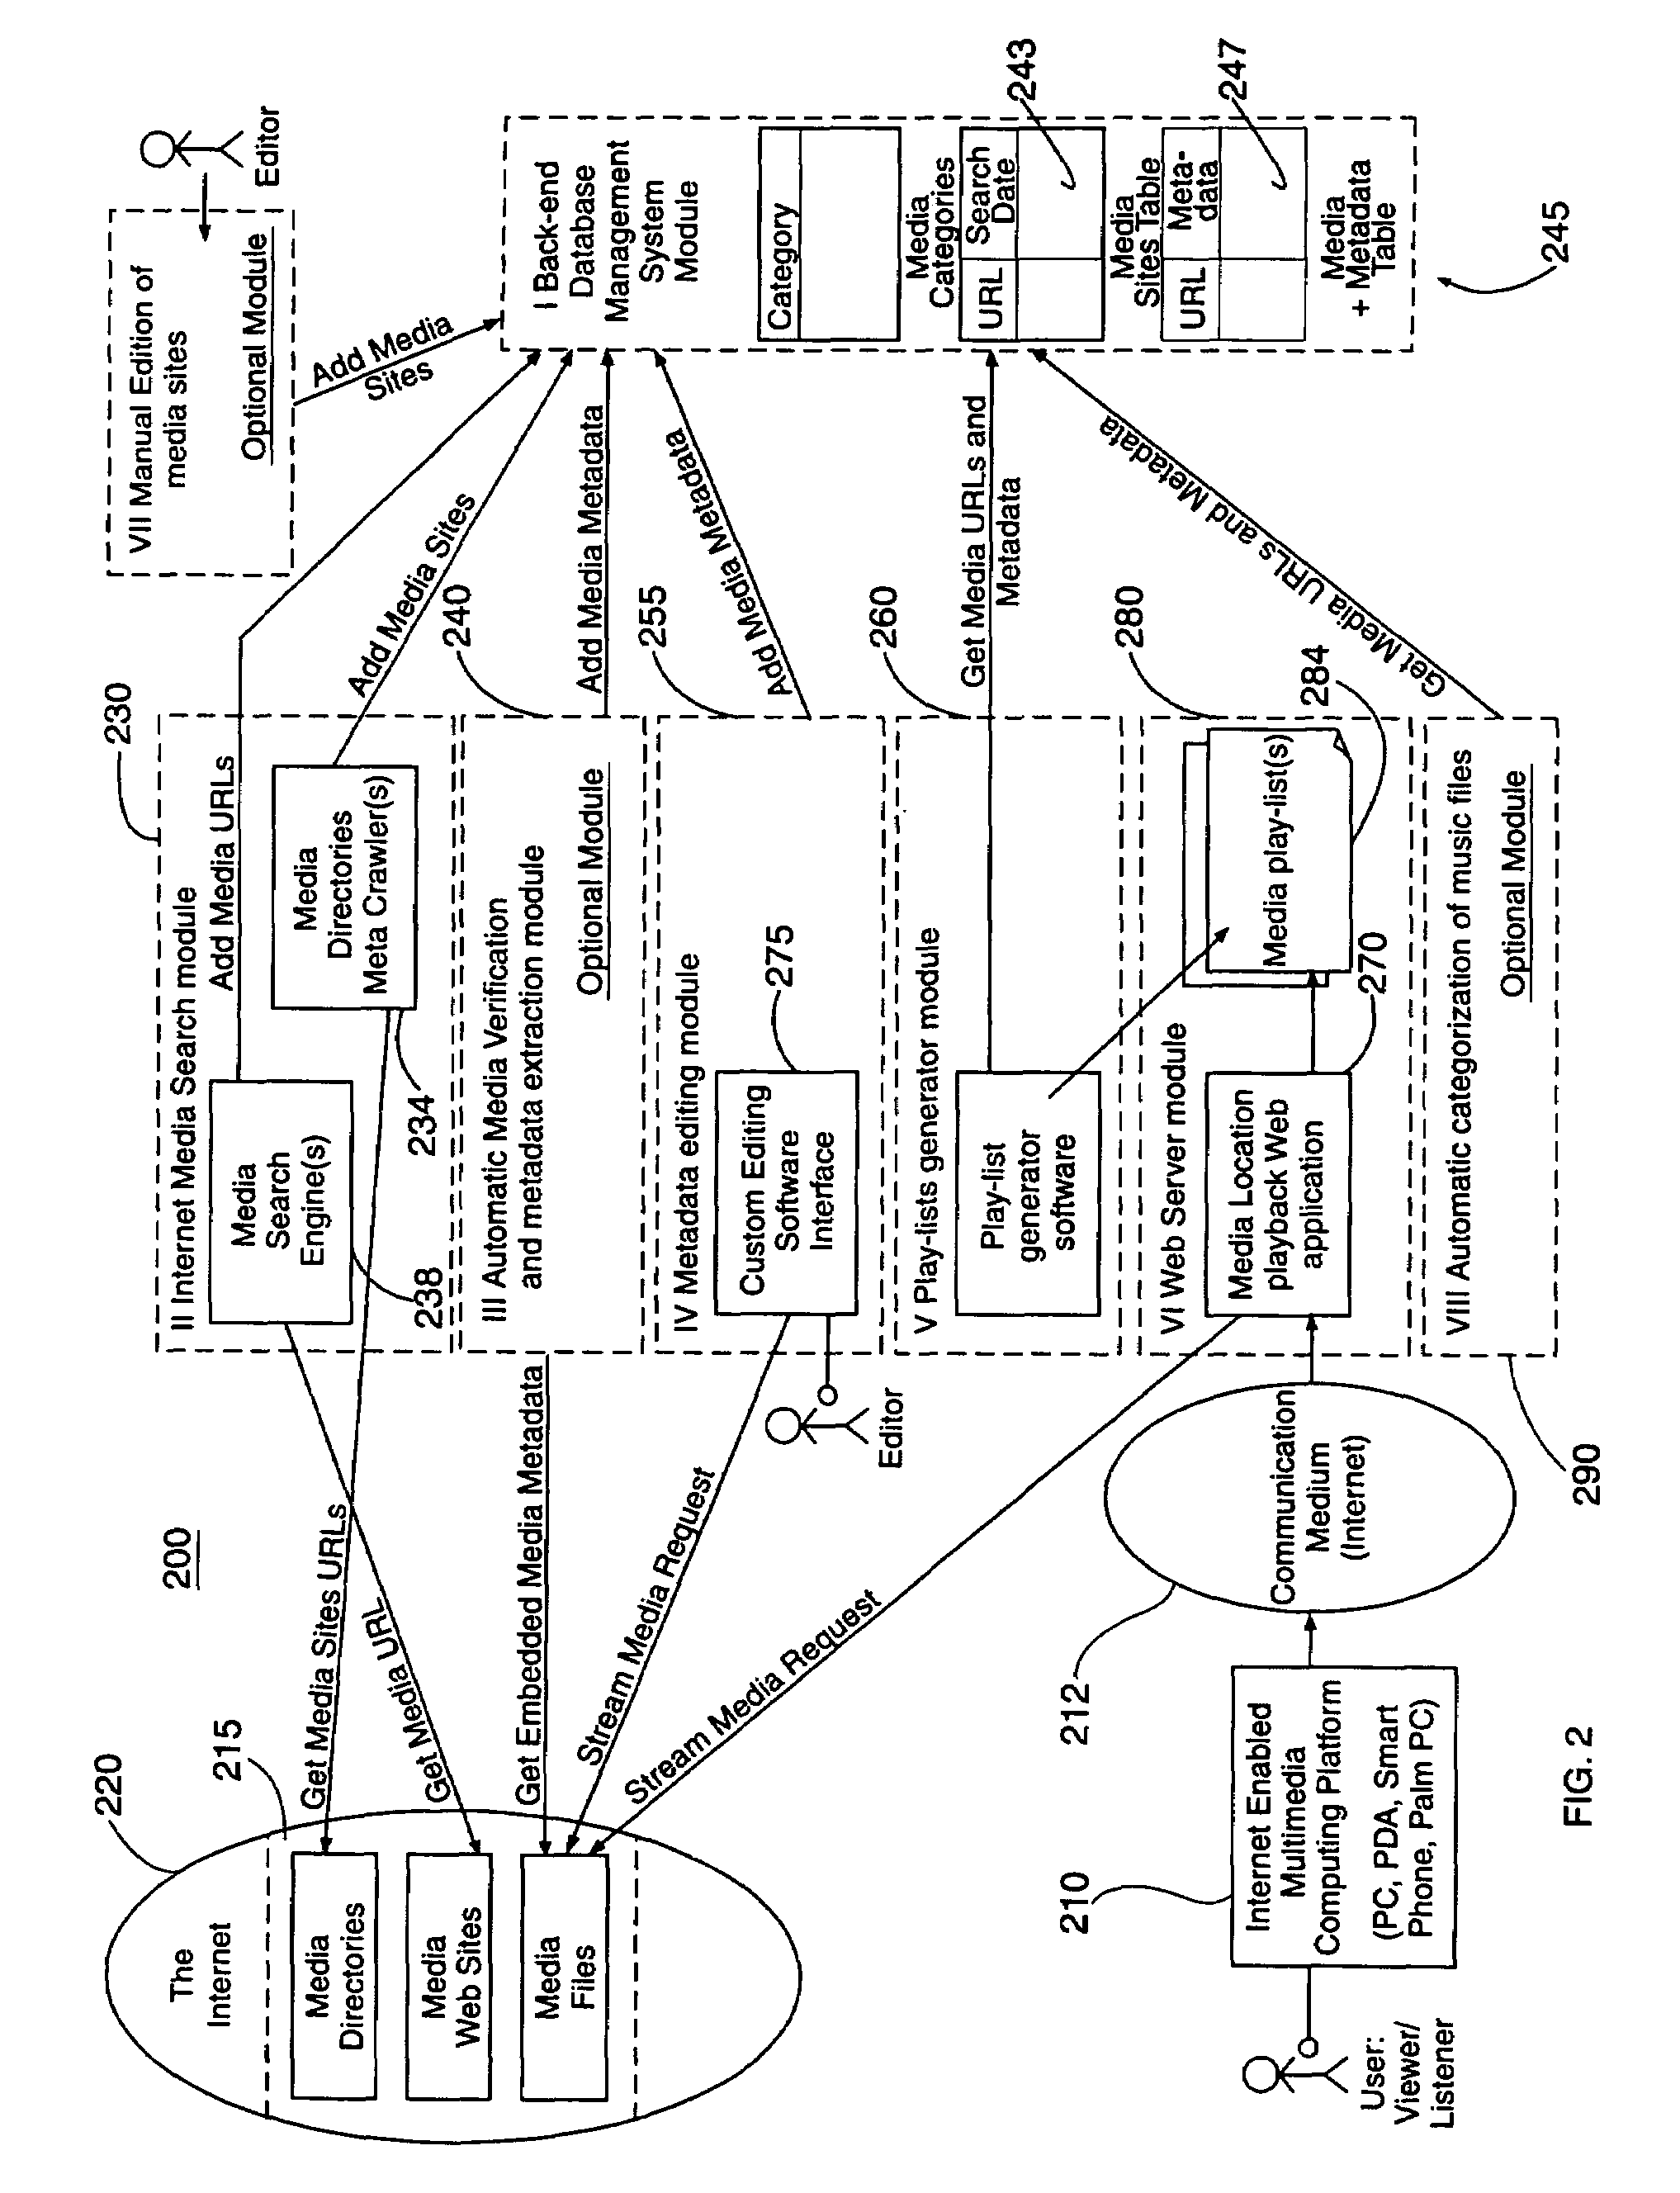 System and method for media playback over a network using links that contain control signals and commands